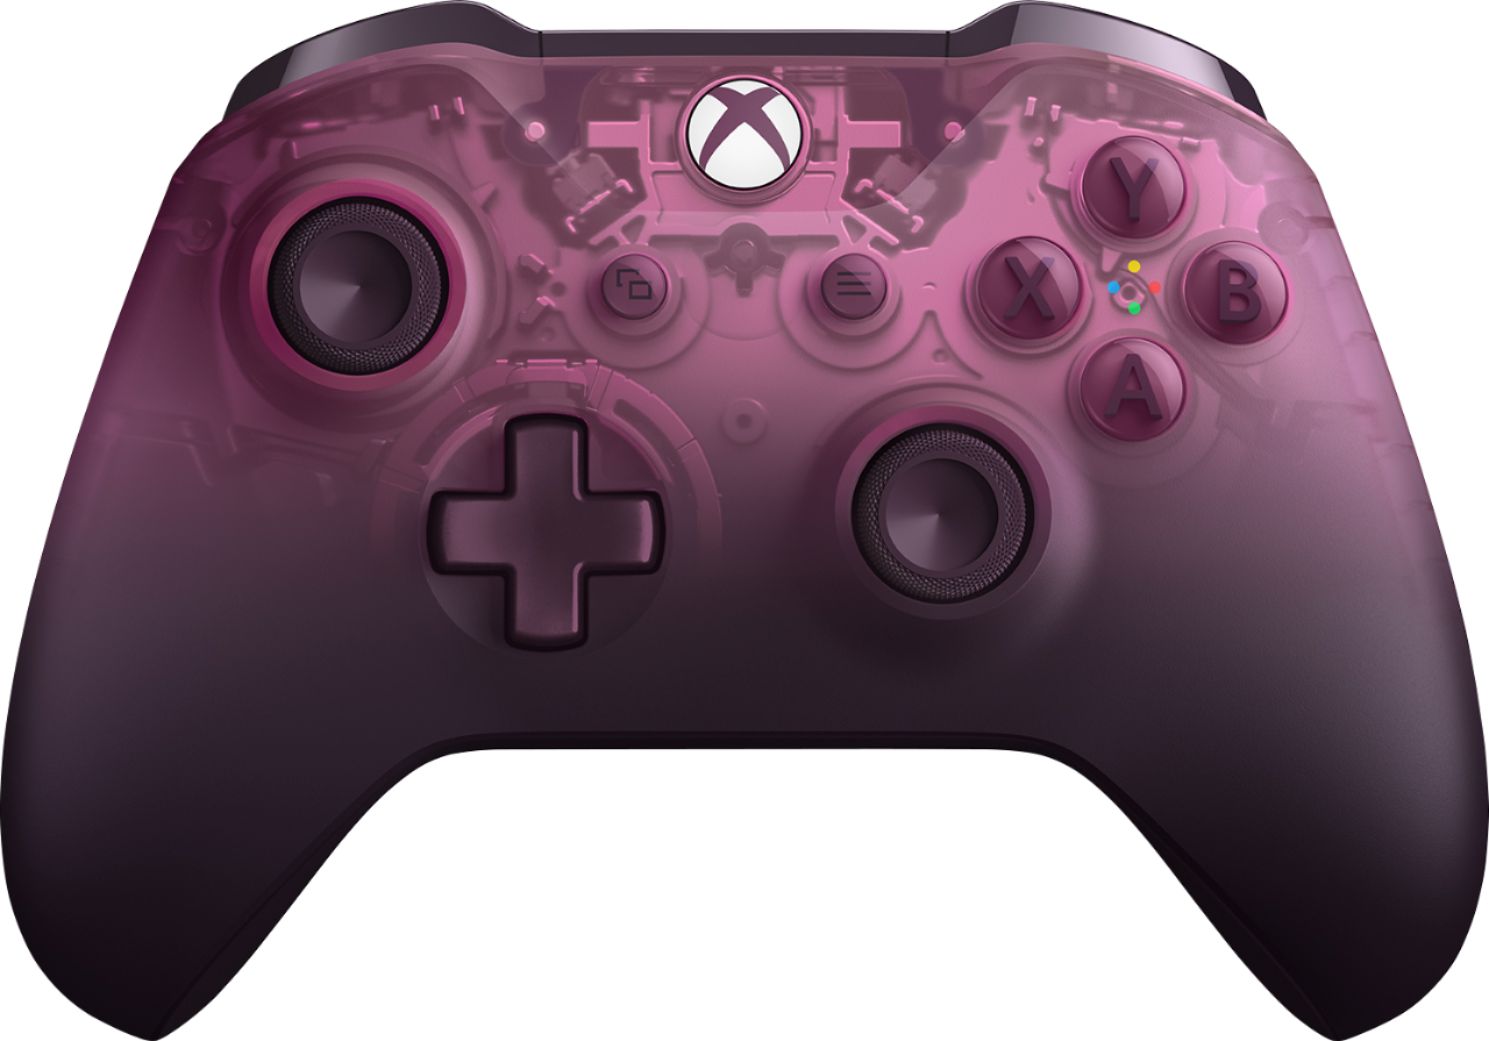 Microsoft - Wireless Controller for Xbox One and Windows 10 - Phantom Magenta Special Edition